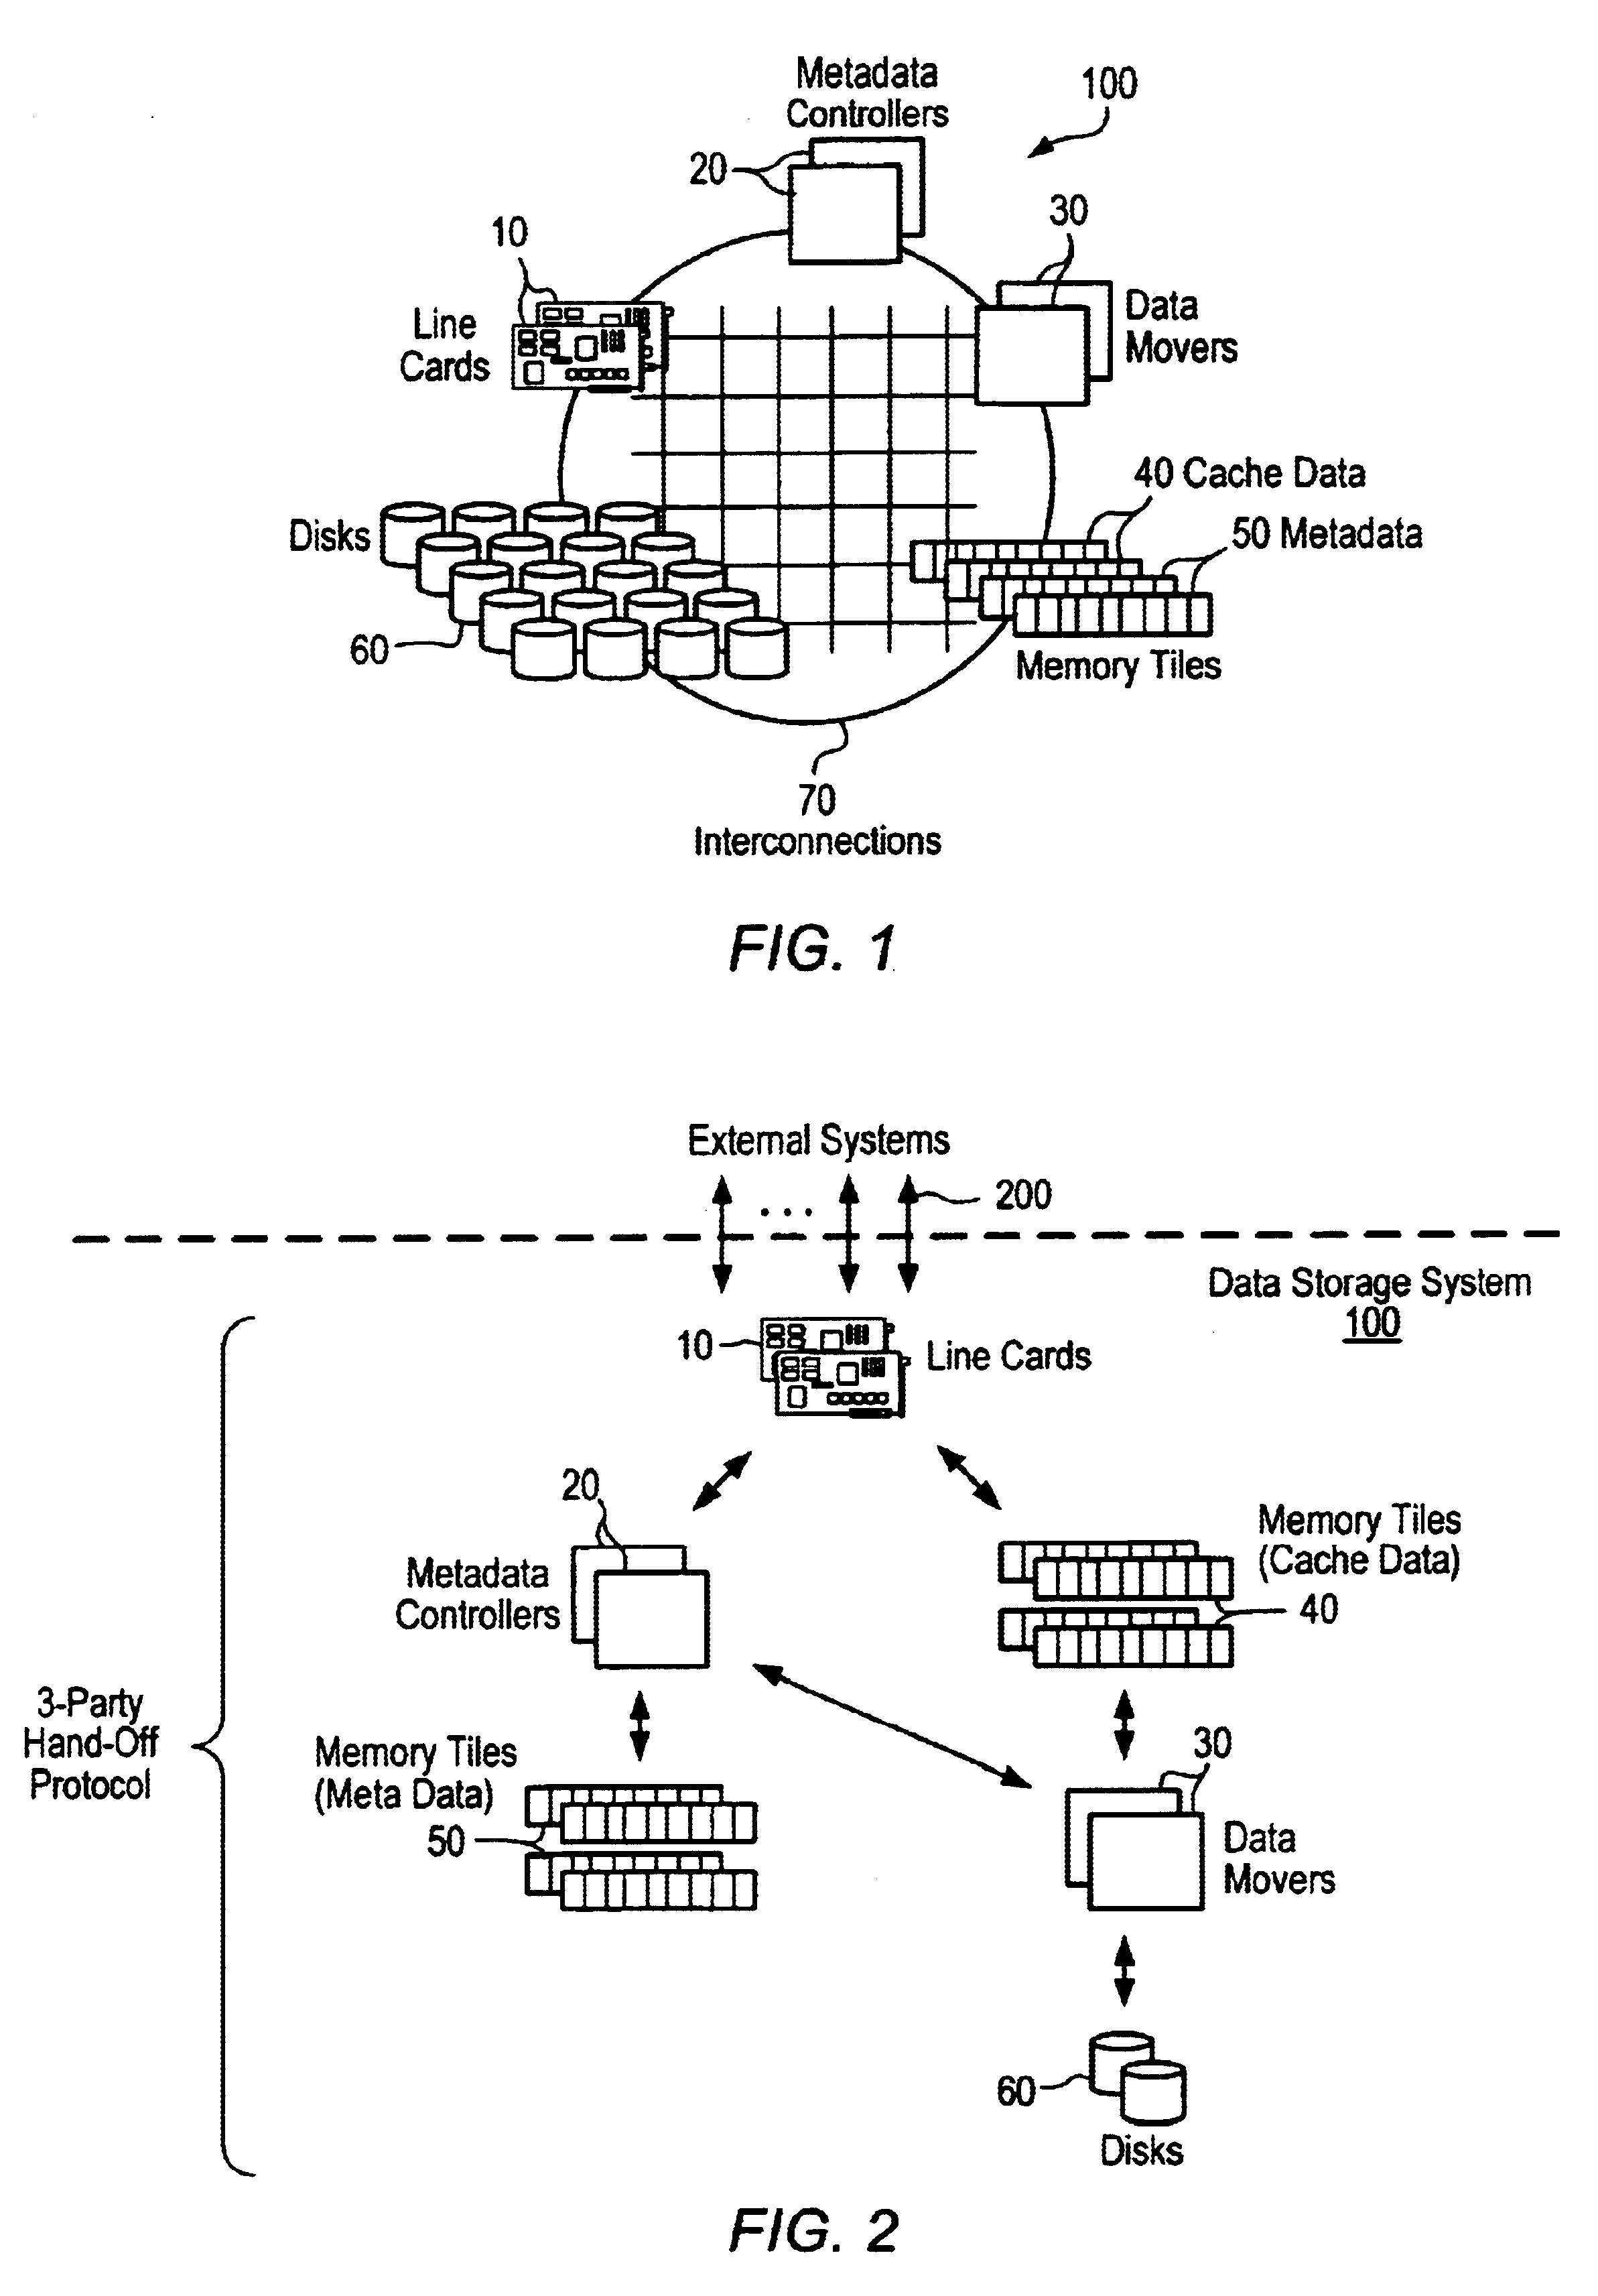 Data storage system using 3-party hand-off protocol to maintain a single coherent logical image